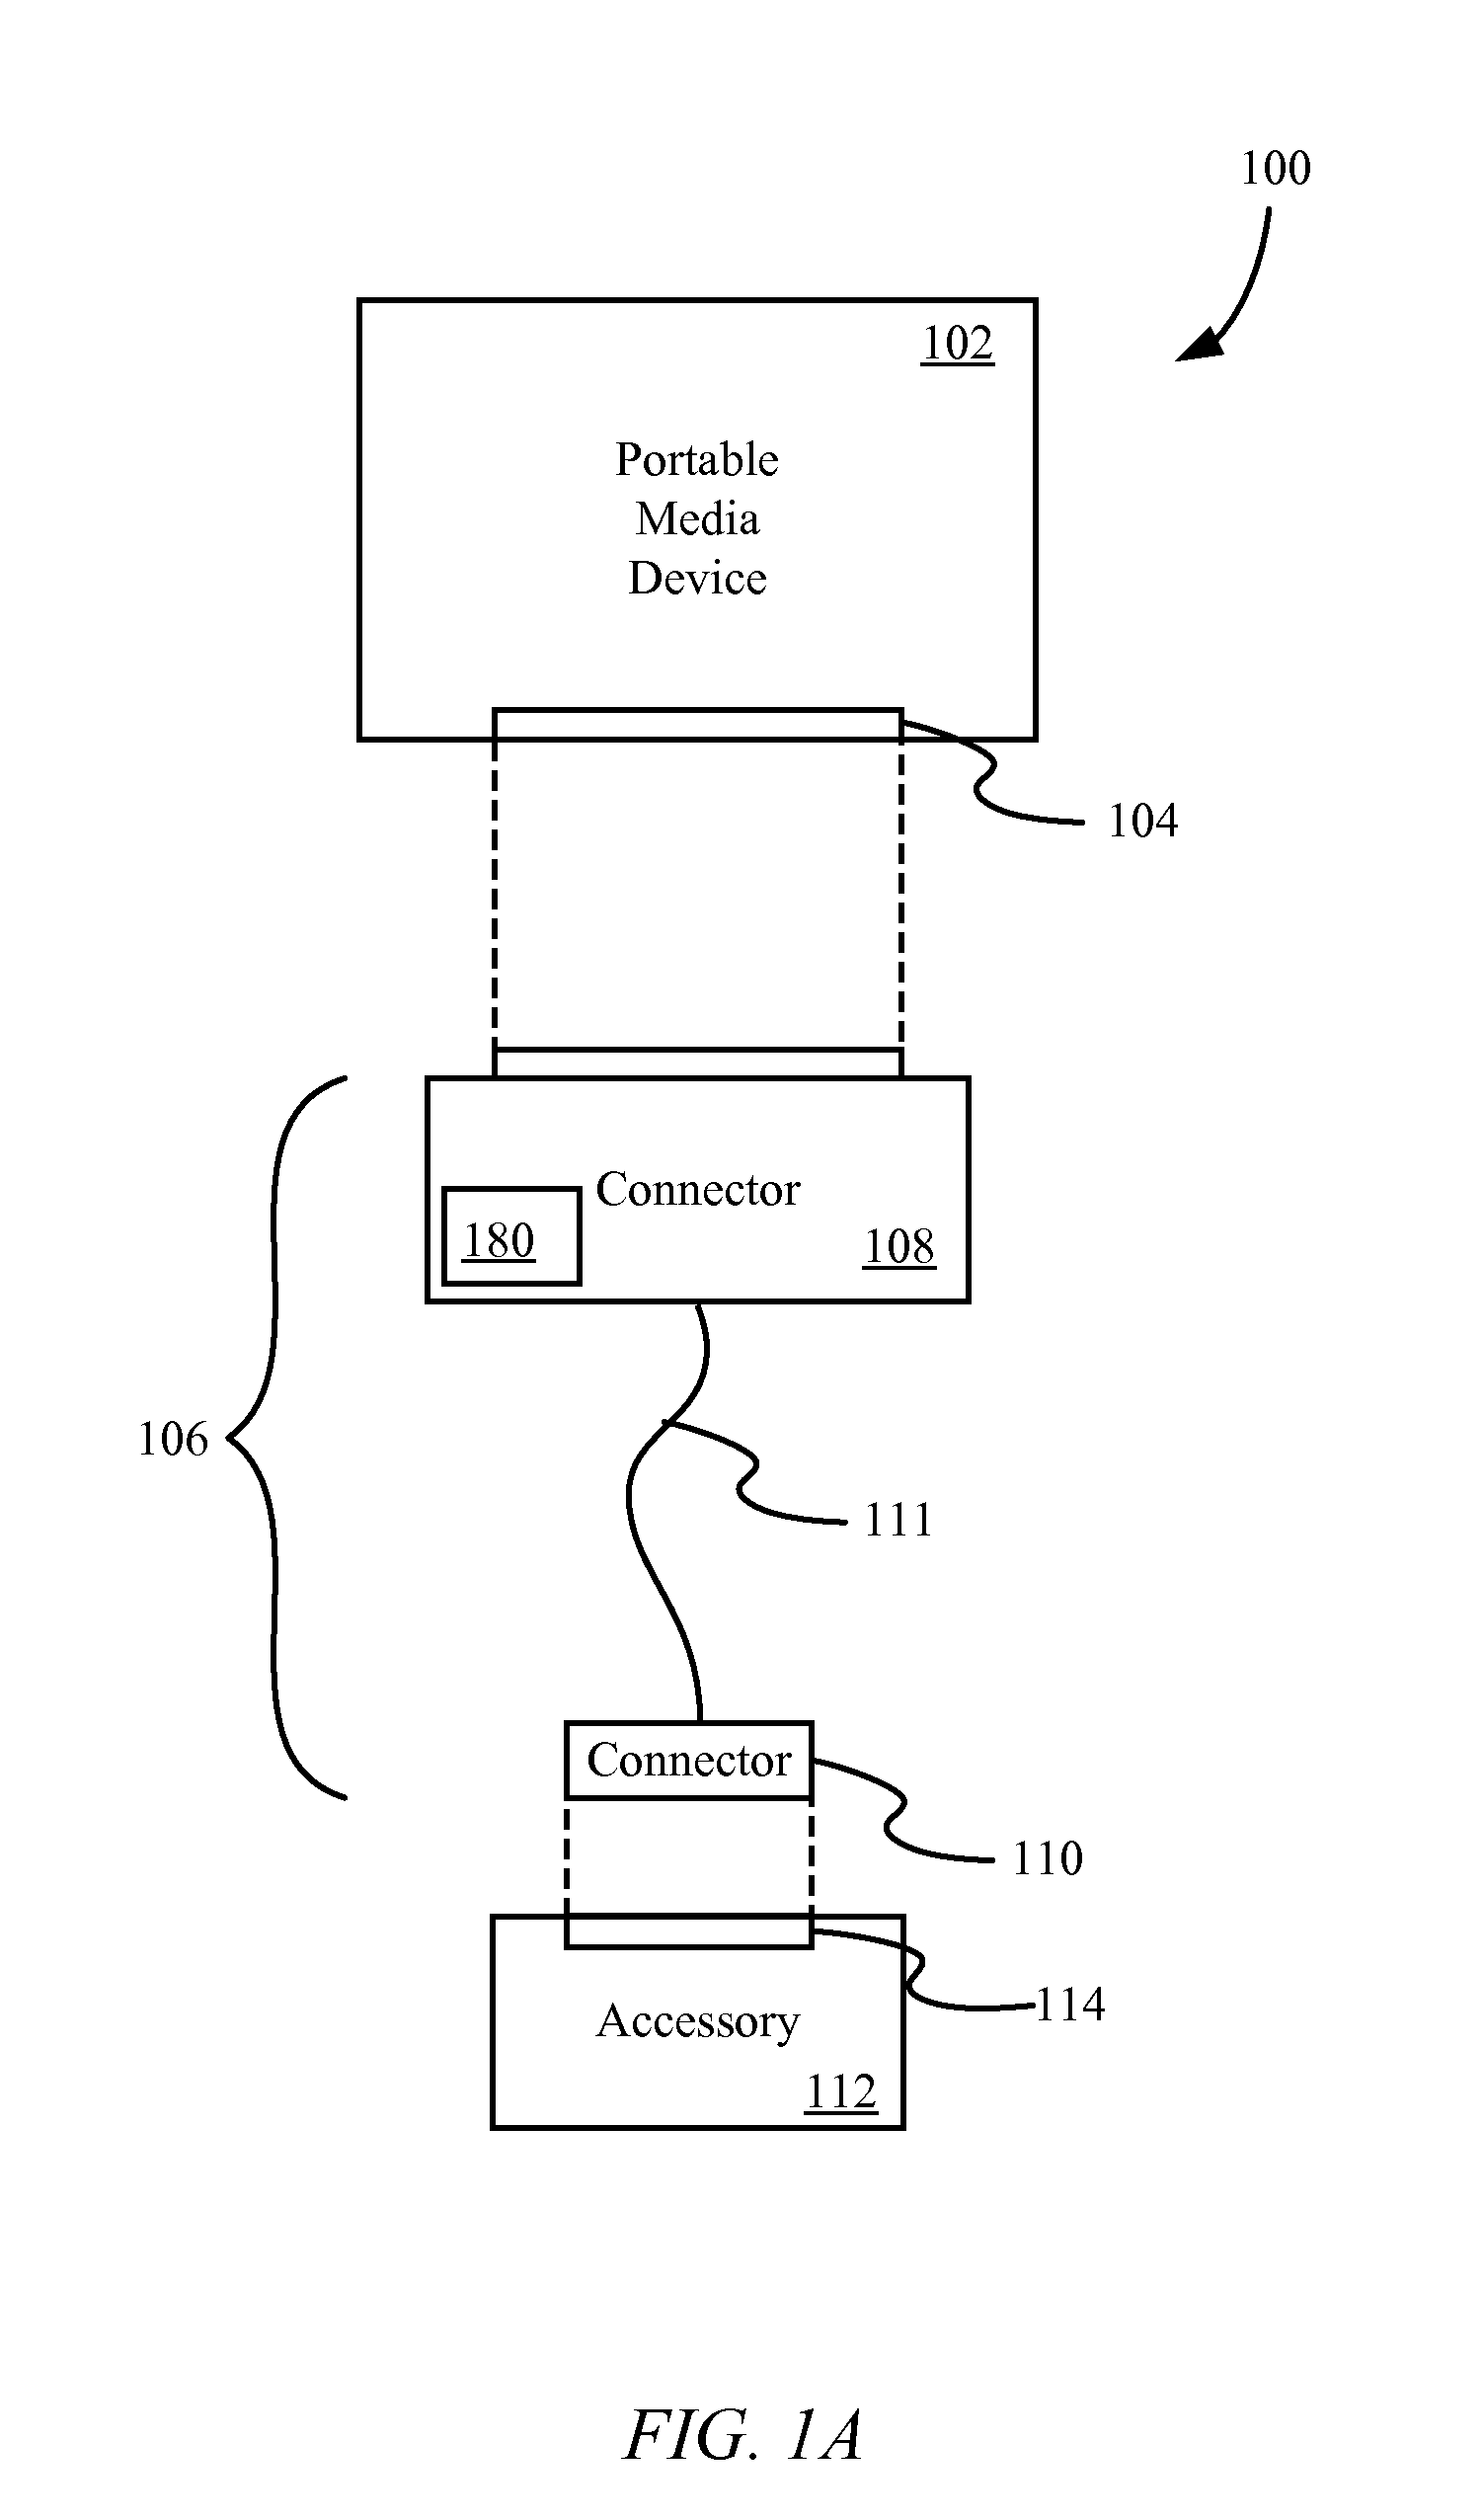 Accessory device authentication